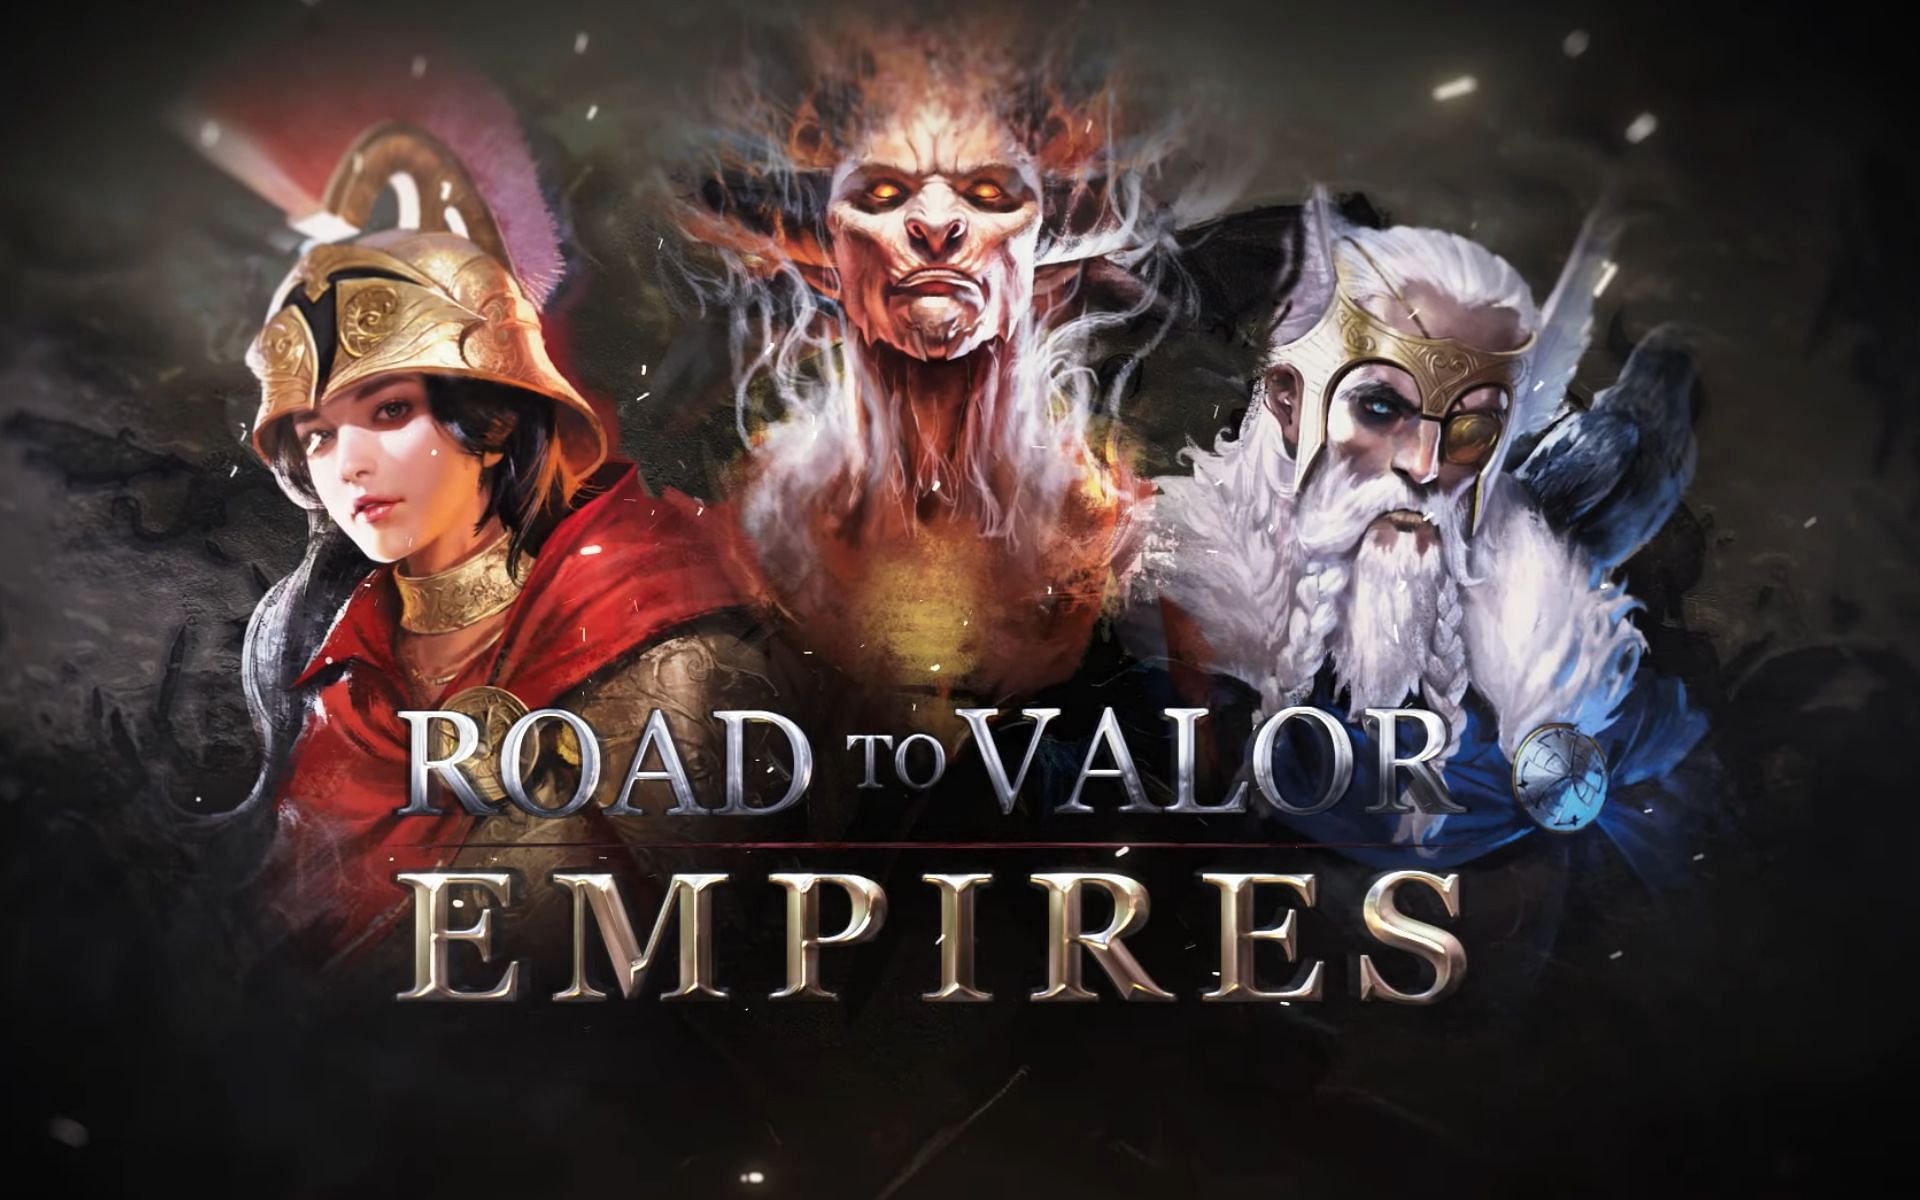 How to pre-register for the Indian version of Road to Valor Empires? (Image via Dreamotion)